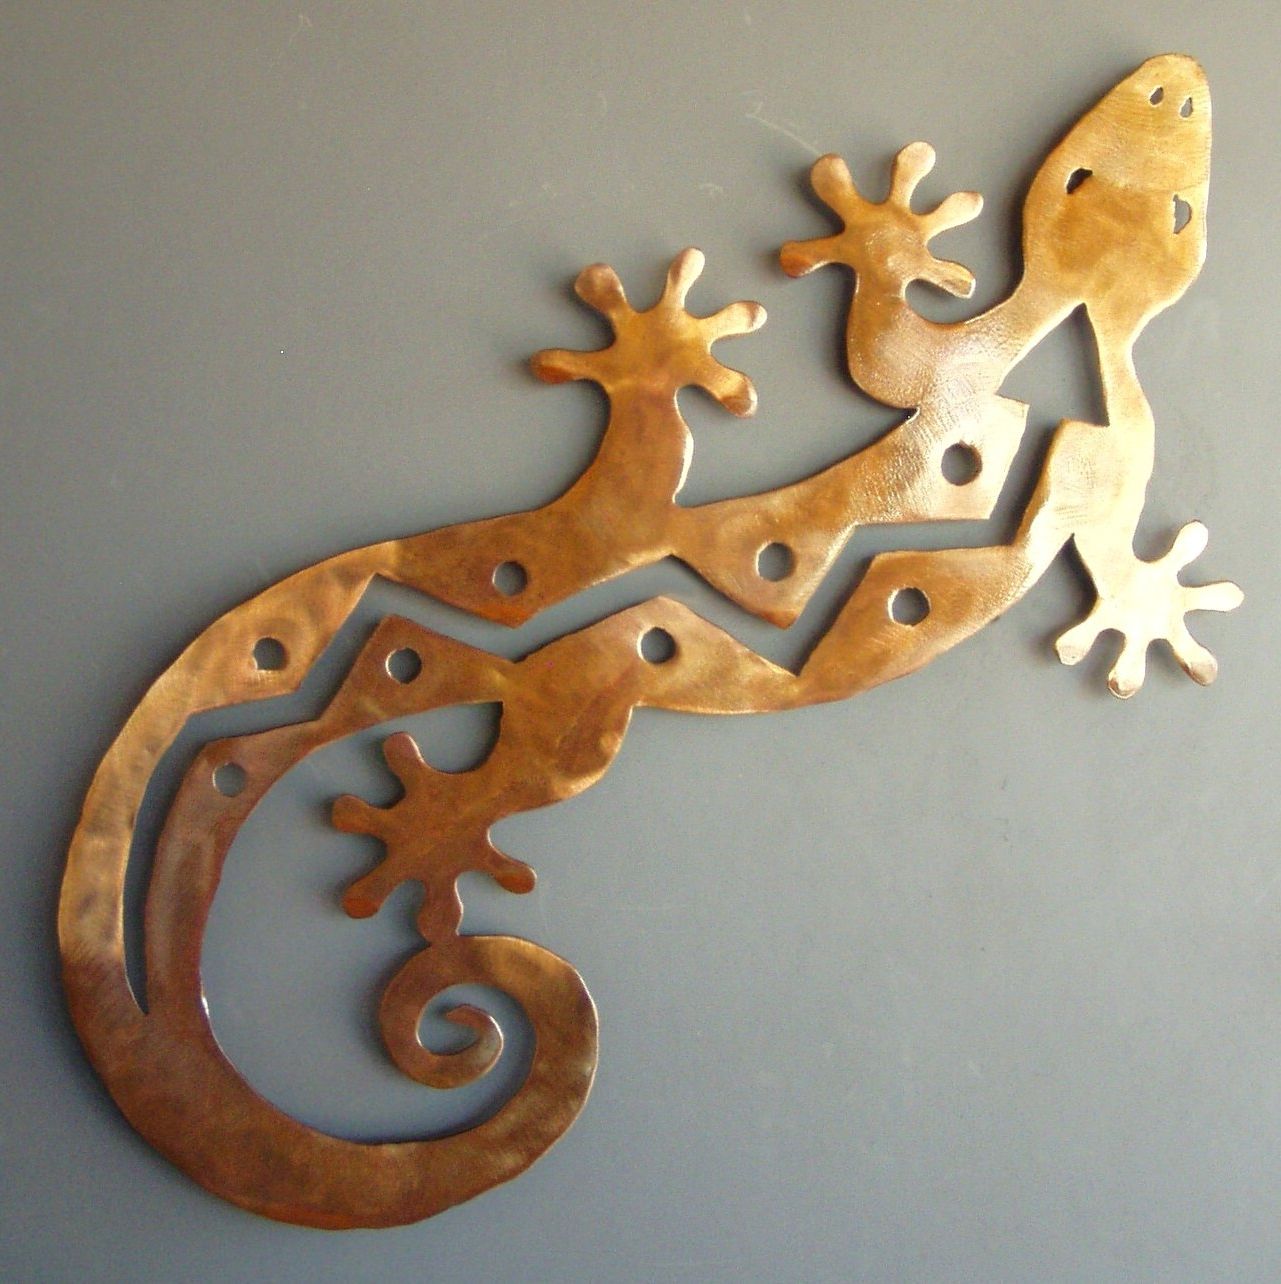 Gecko Outdoor Wall Art Intended For Preferred Wall Arts ~ Outdoor Metal Gecko Wall Art Gecko Metal Wall Art (View 15 of 15)